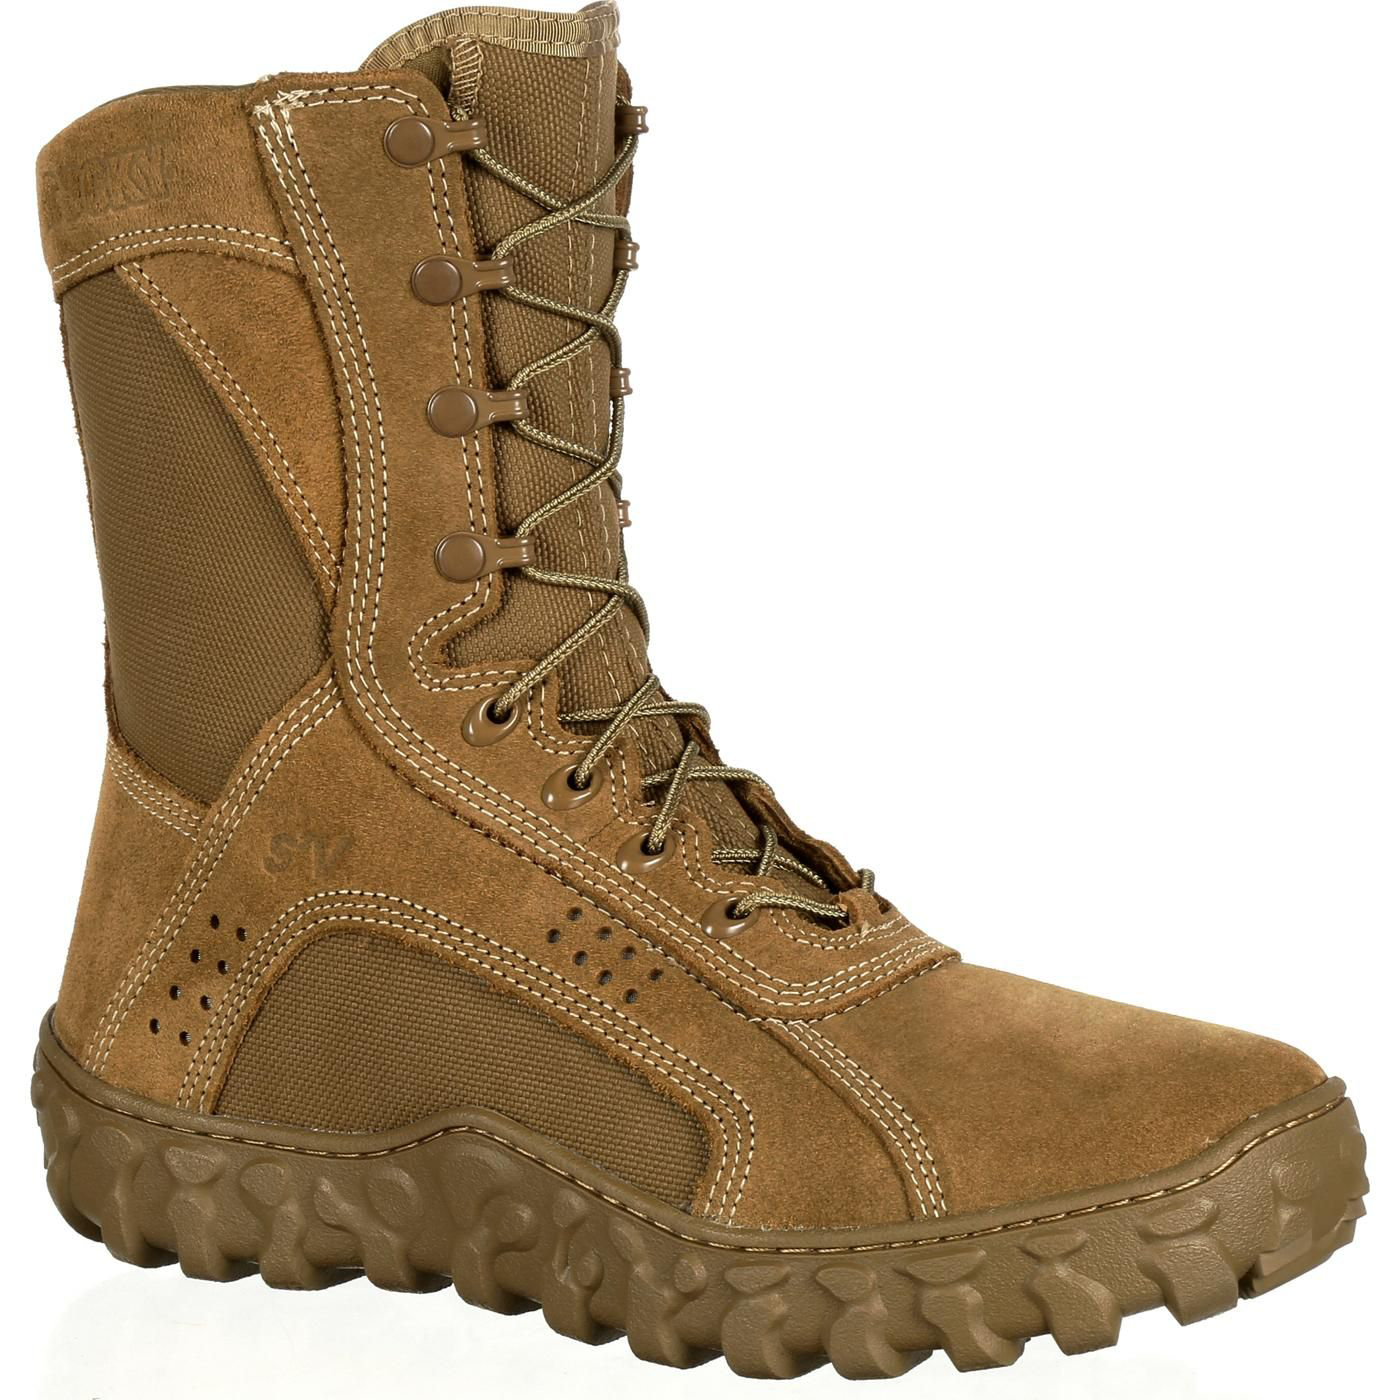 Rocky S2V Tactical Military Boots for Men - Coyote Brown - 4.5W